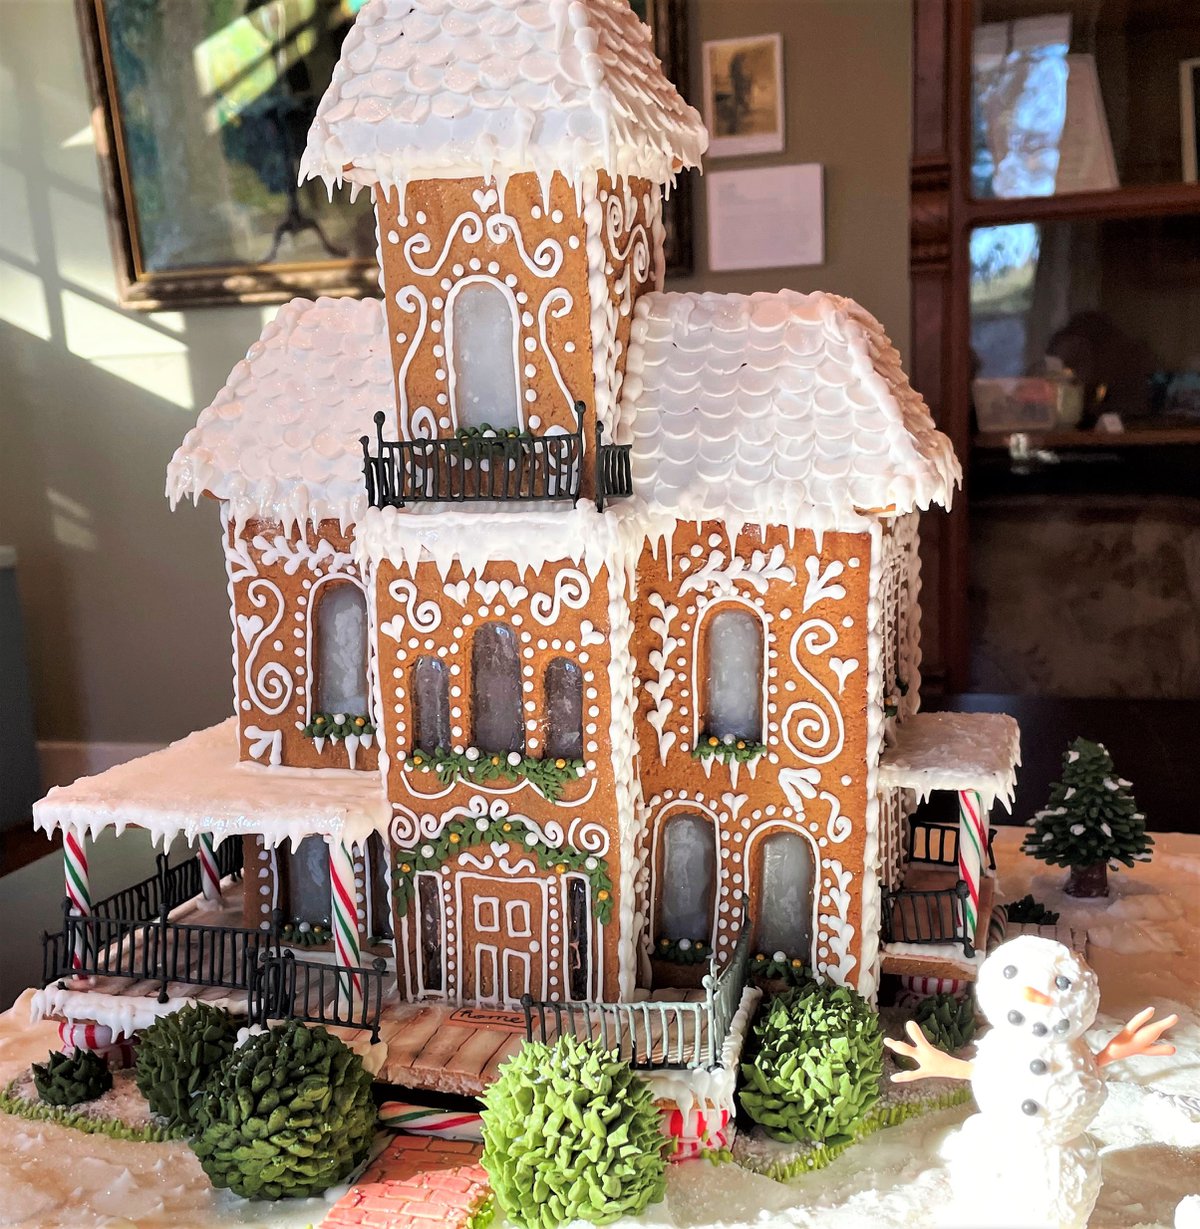 Salem Museum Hosts Gingerbread House Competition